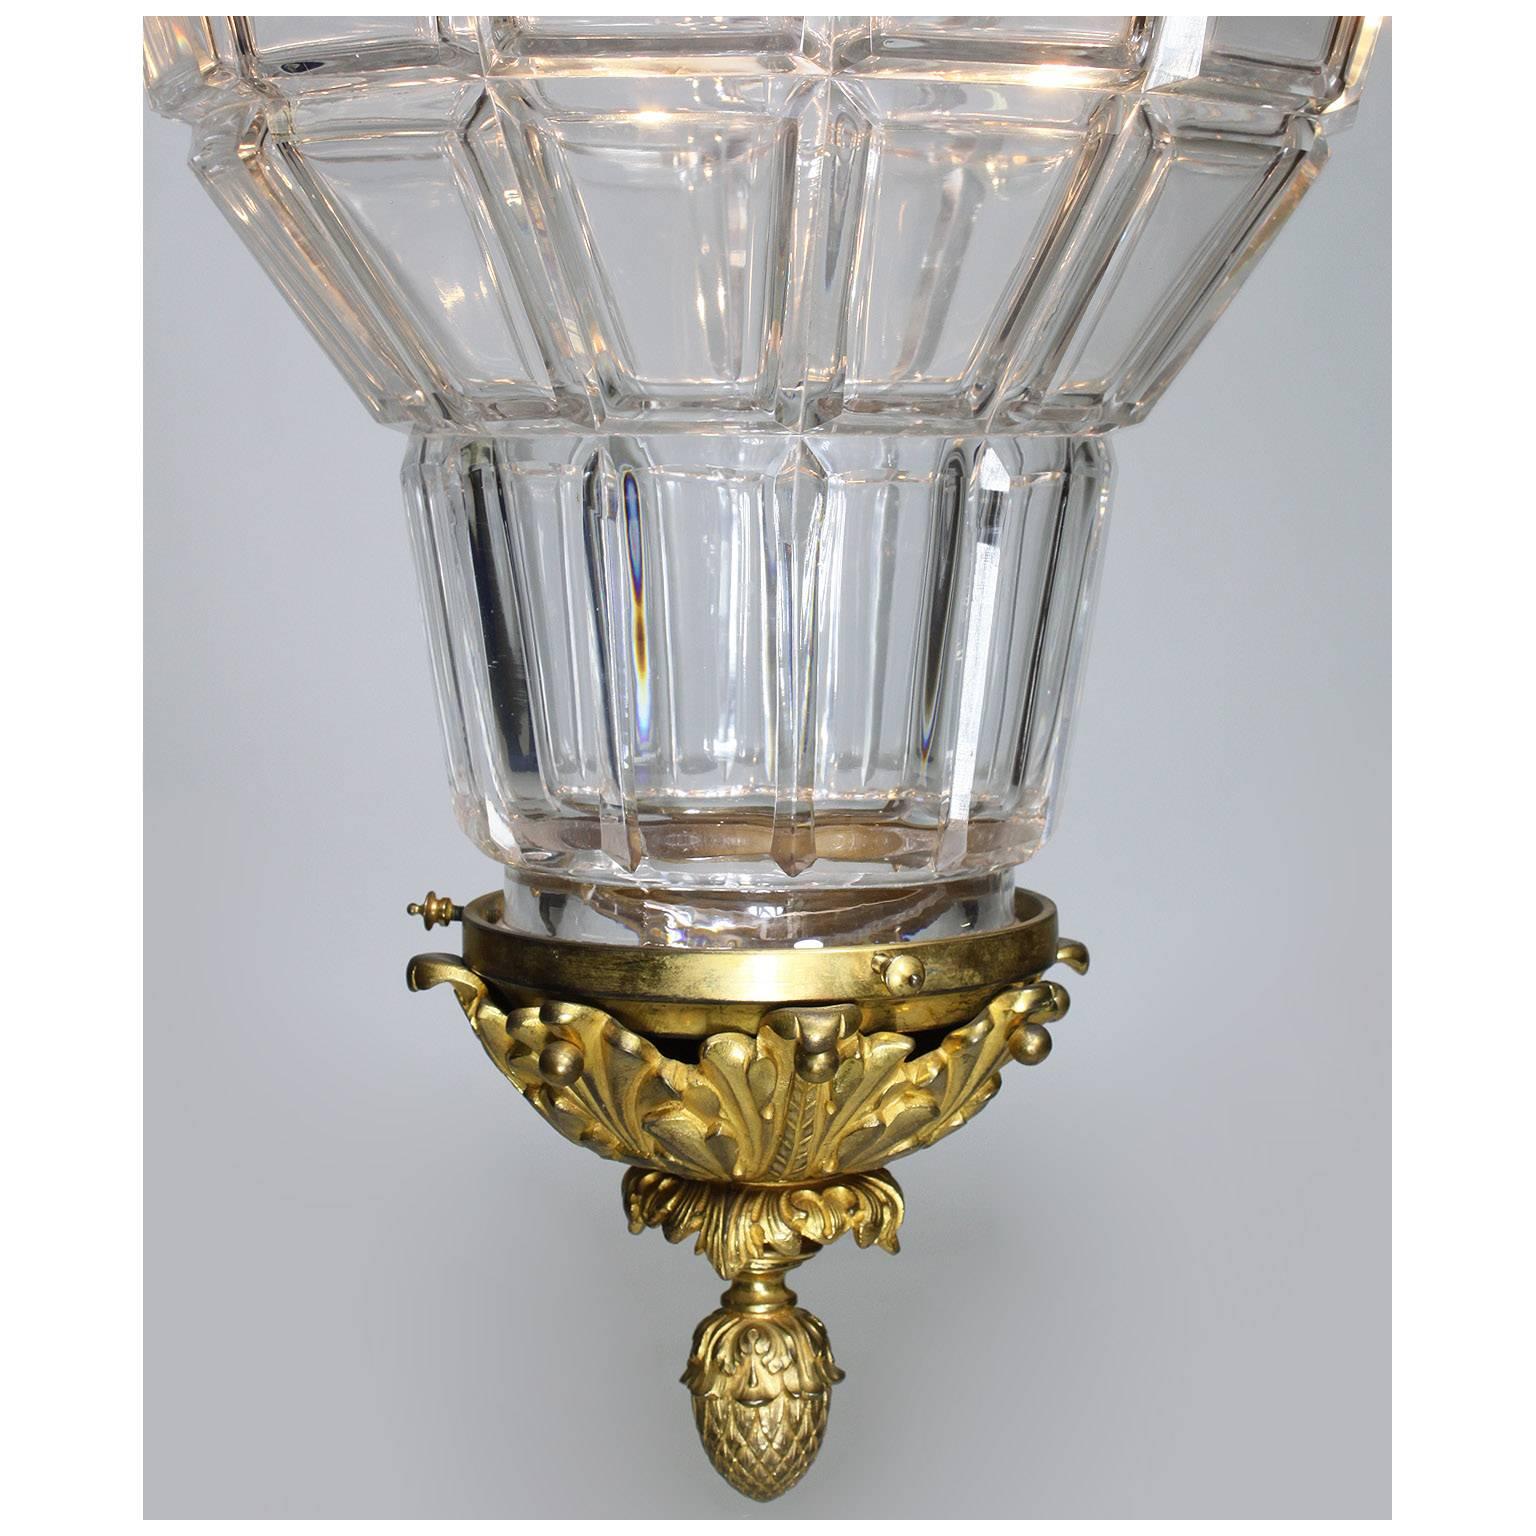 French 19-20th Century Gilt-Bronze & Molded Cut-Glass 